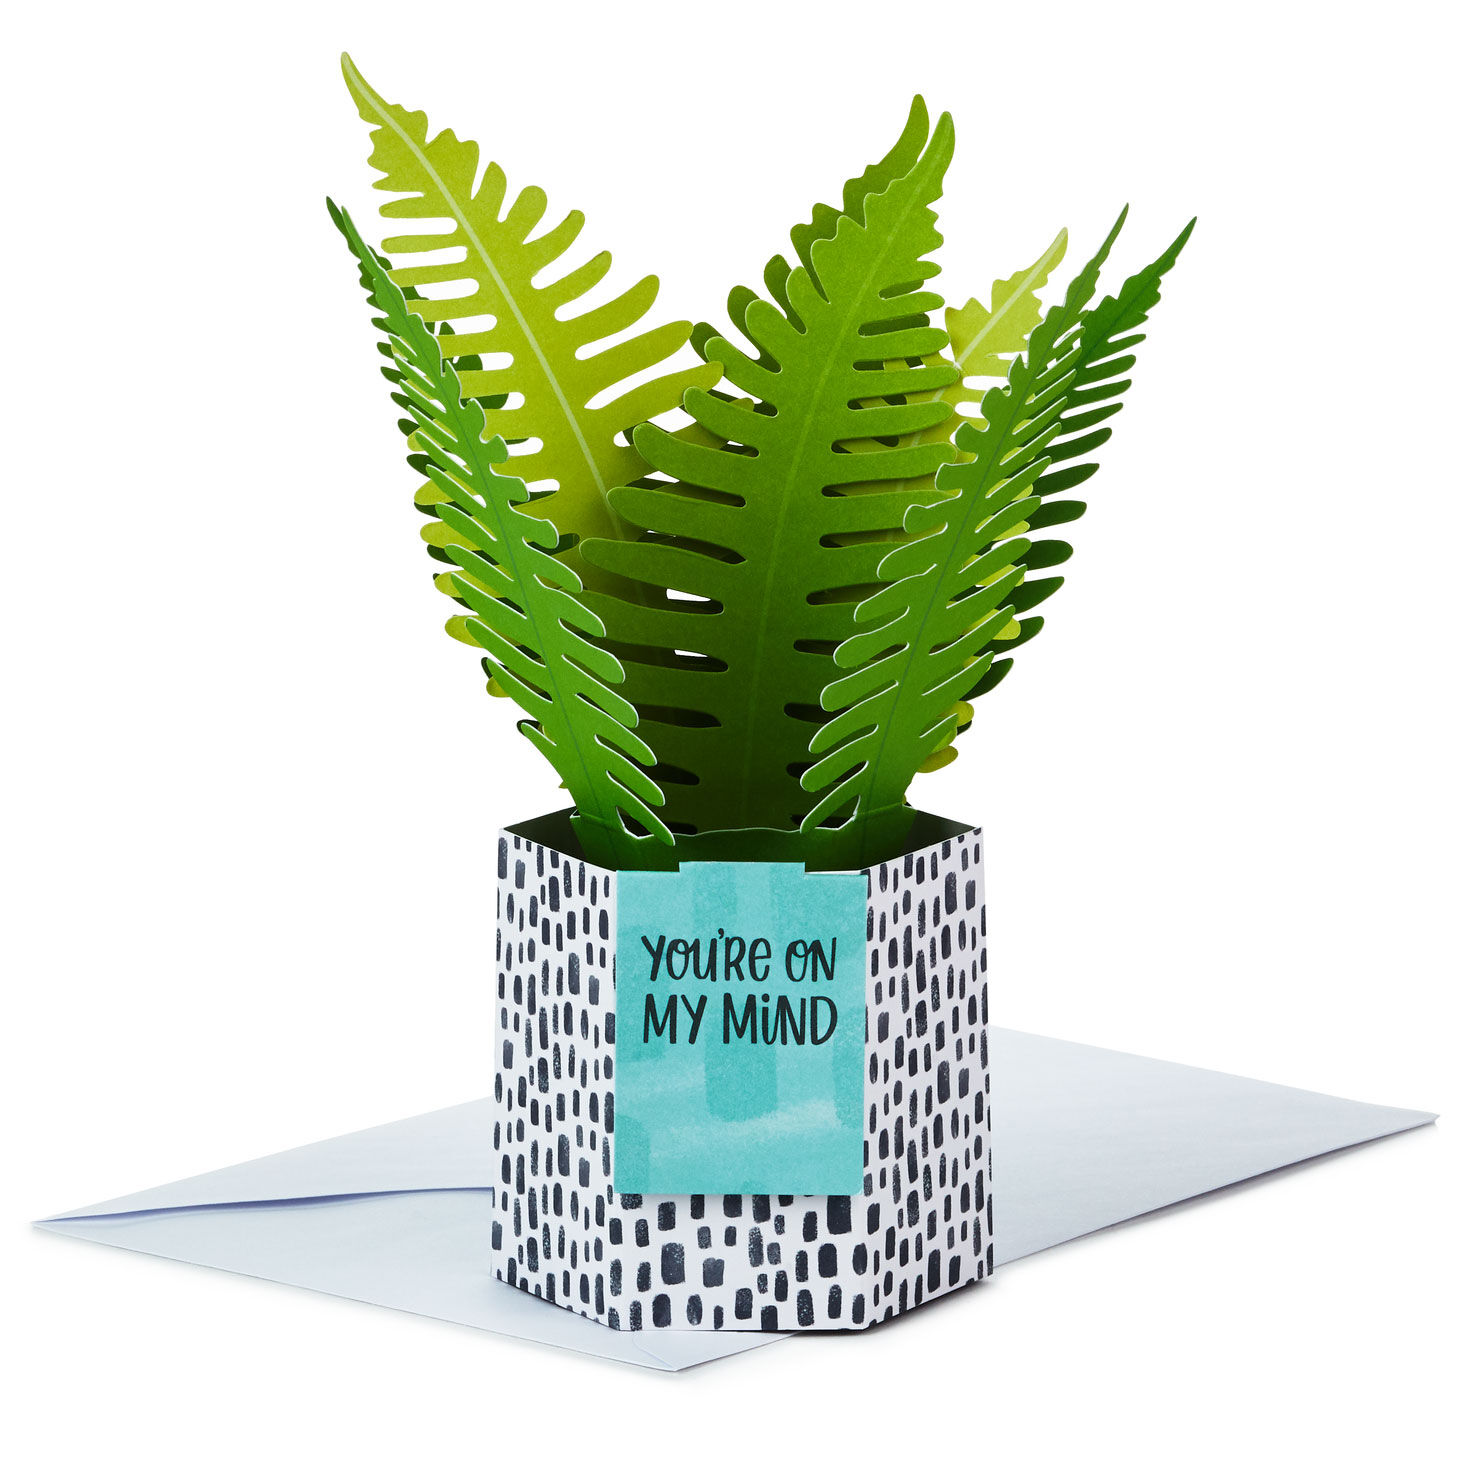 Fern Rooting for You 3D Pop-Up Thinking of You Card for only USD 6.99 | Hallmark